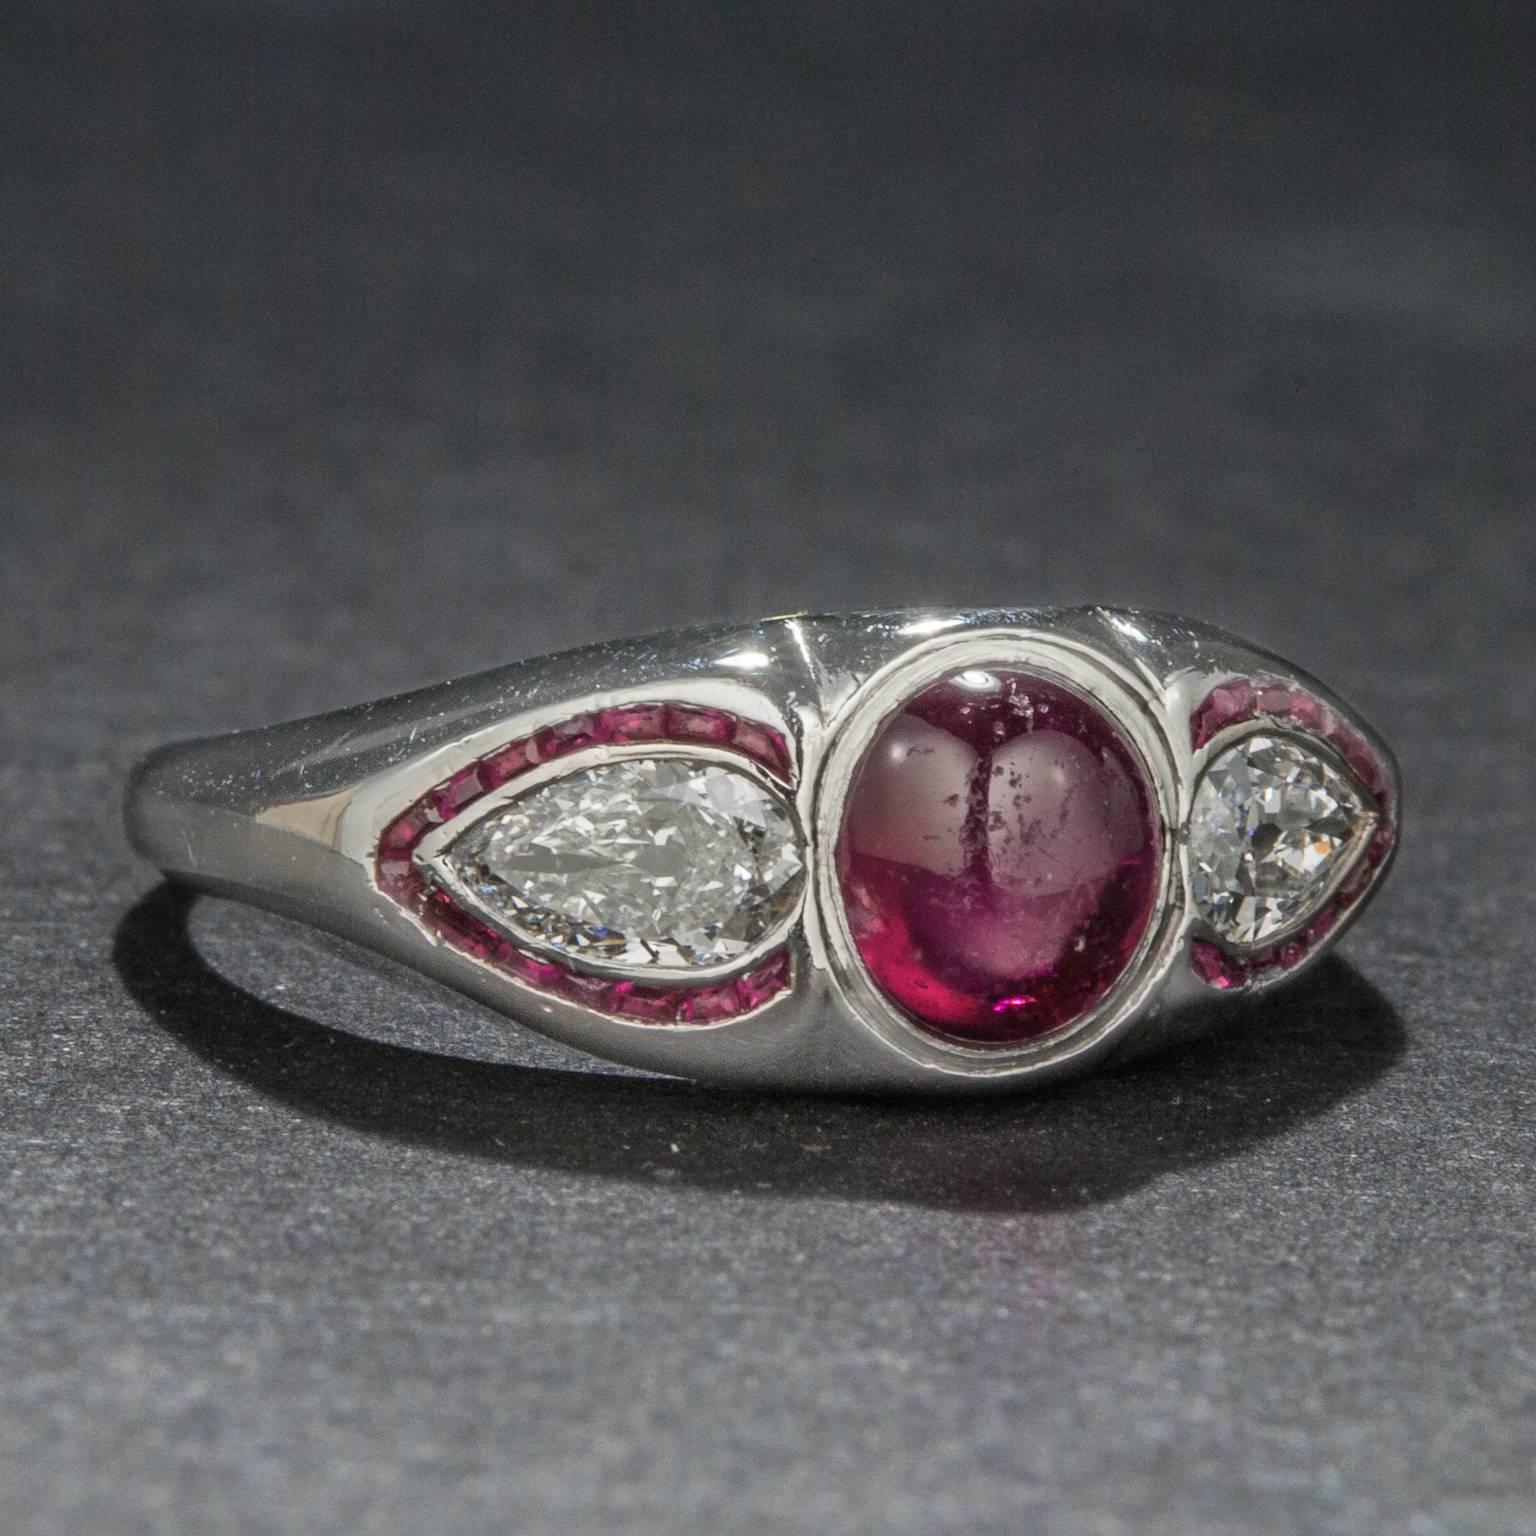 This stunning Retro era ring includes a 1.25 carat cabochon cut ruby, two pear cut diamonds and additional ruby accents. The piece is crafted in platinum and is currently size 8.